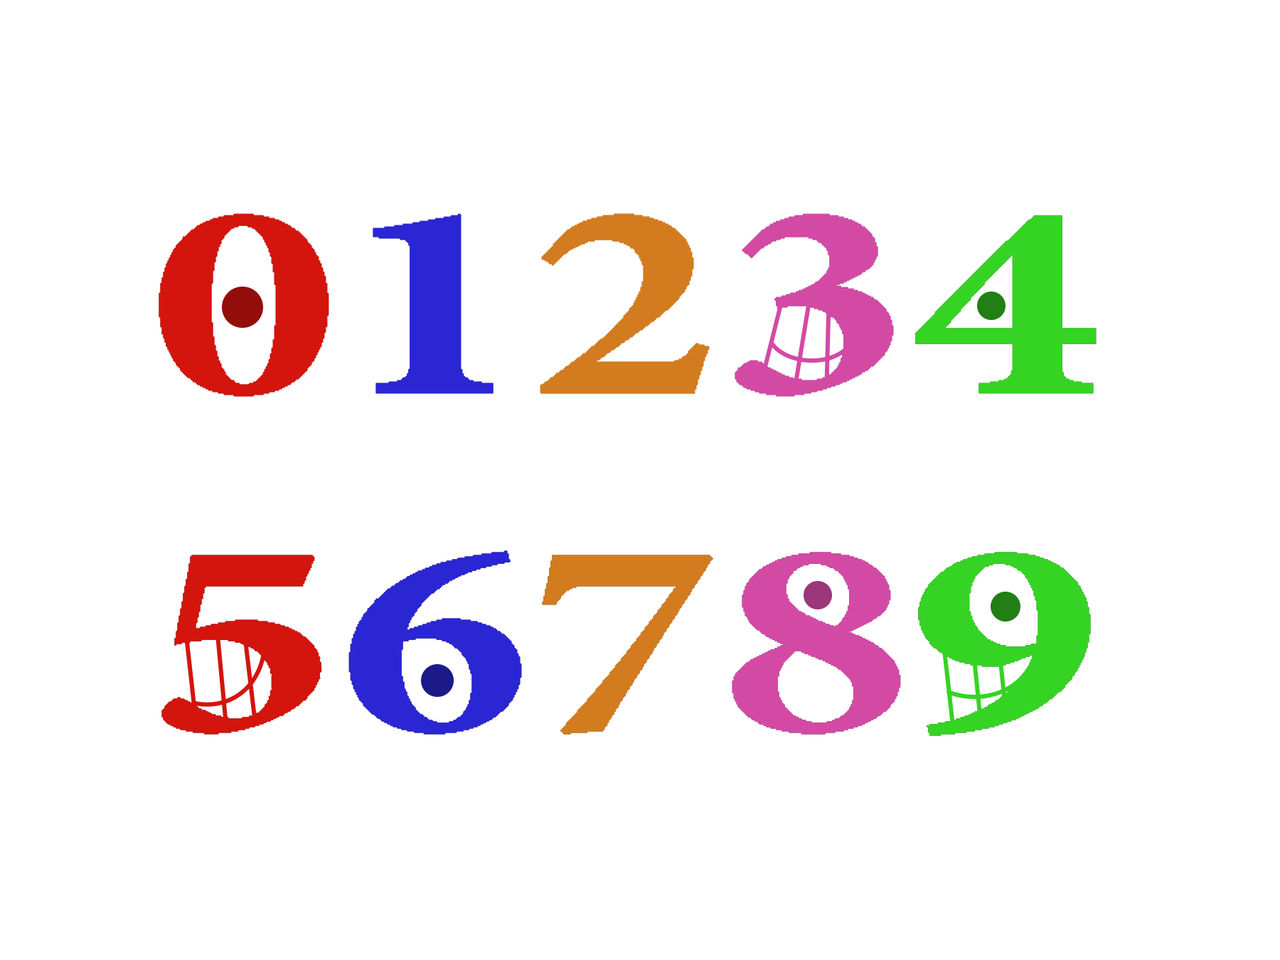 TVOKIds Letters and Numbers in Noggin Bulb Font by jesnoyers on